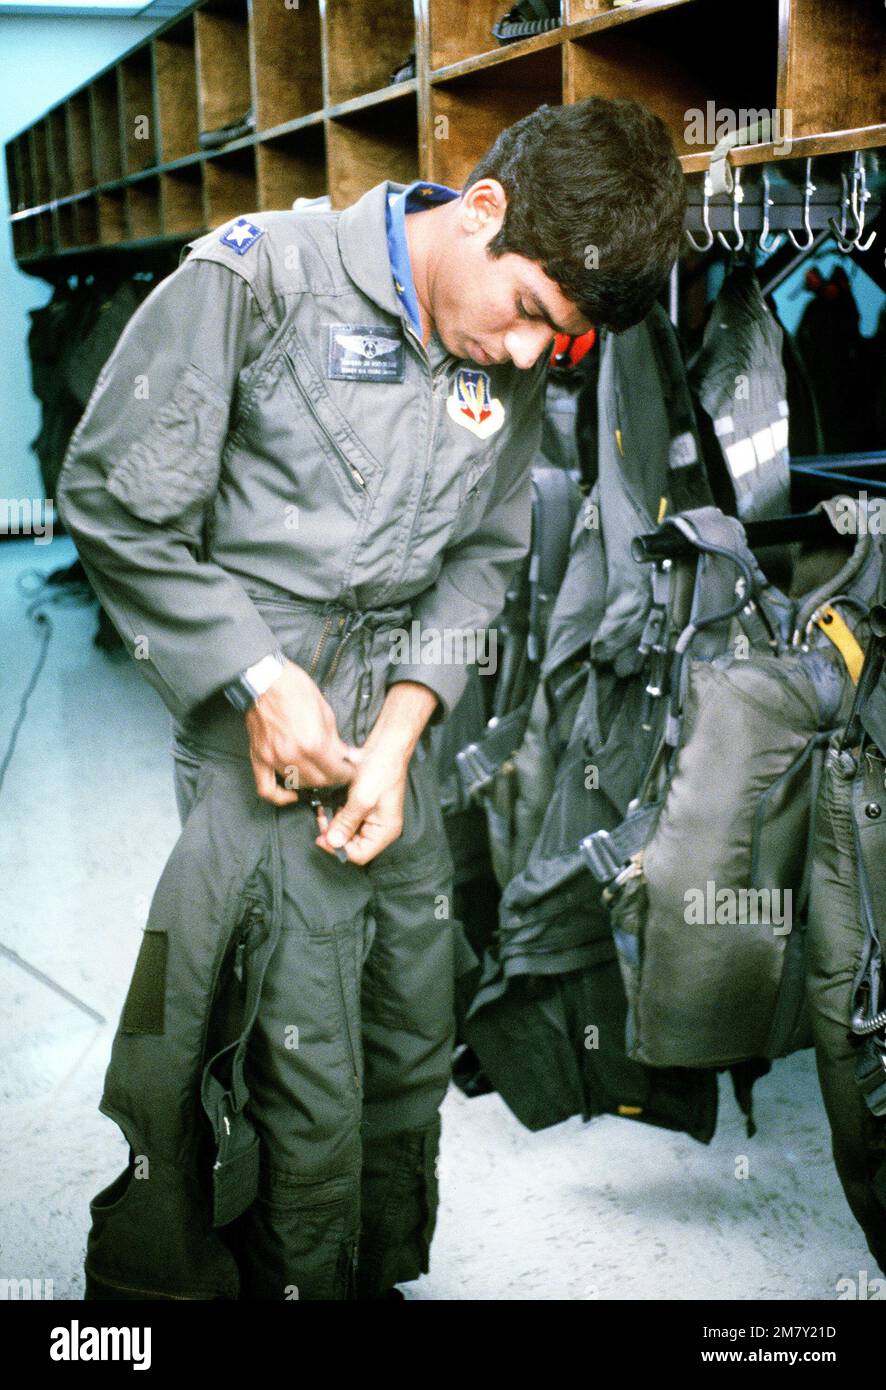 2LT Sulieman Al-Rabiah takes his flight gear off the rack and suits up prior to flying a training mission. Base: Williams Air Force Base State: Arizona (AZ) Country: United States Of America (USA) Stock Photo